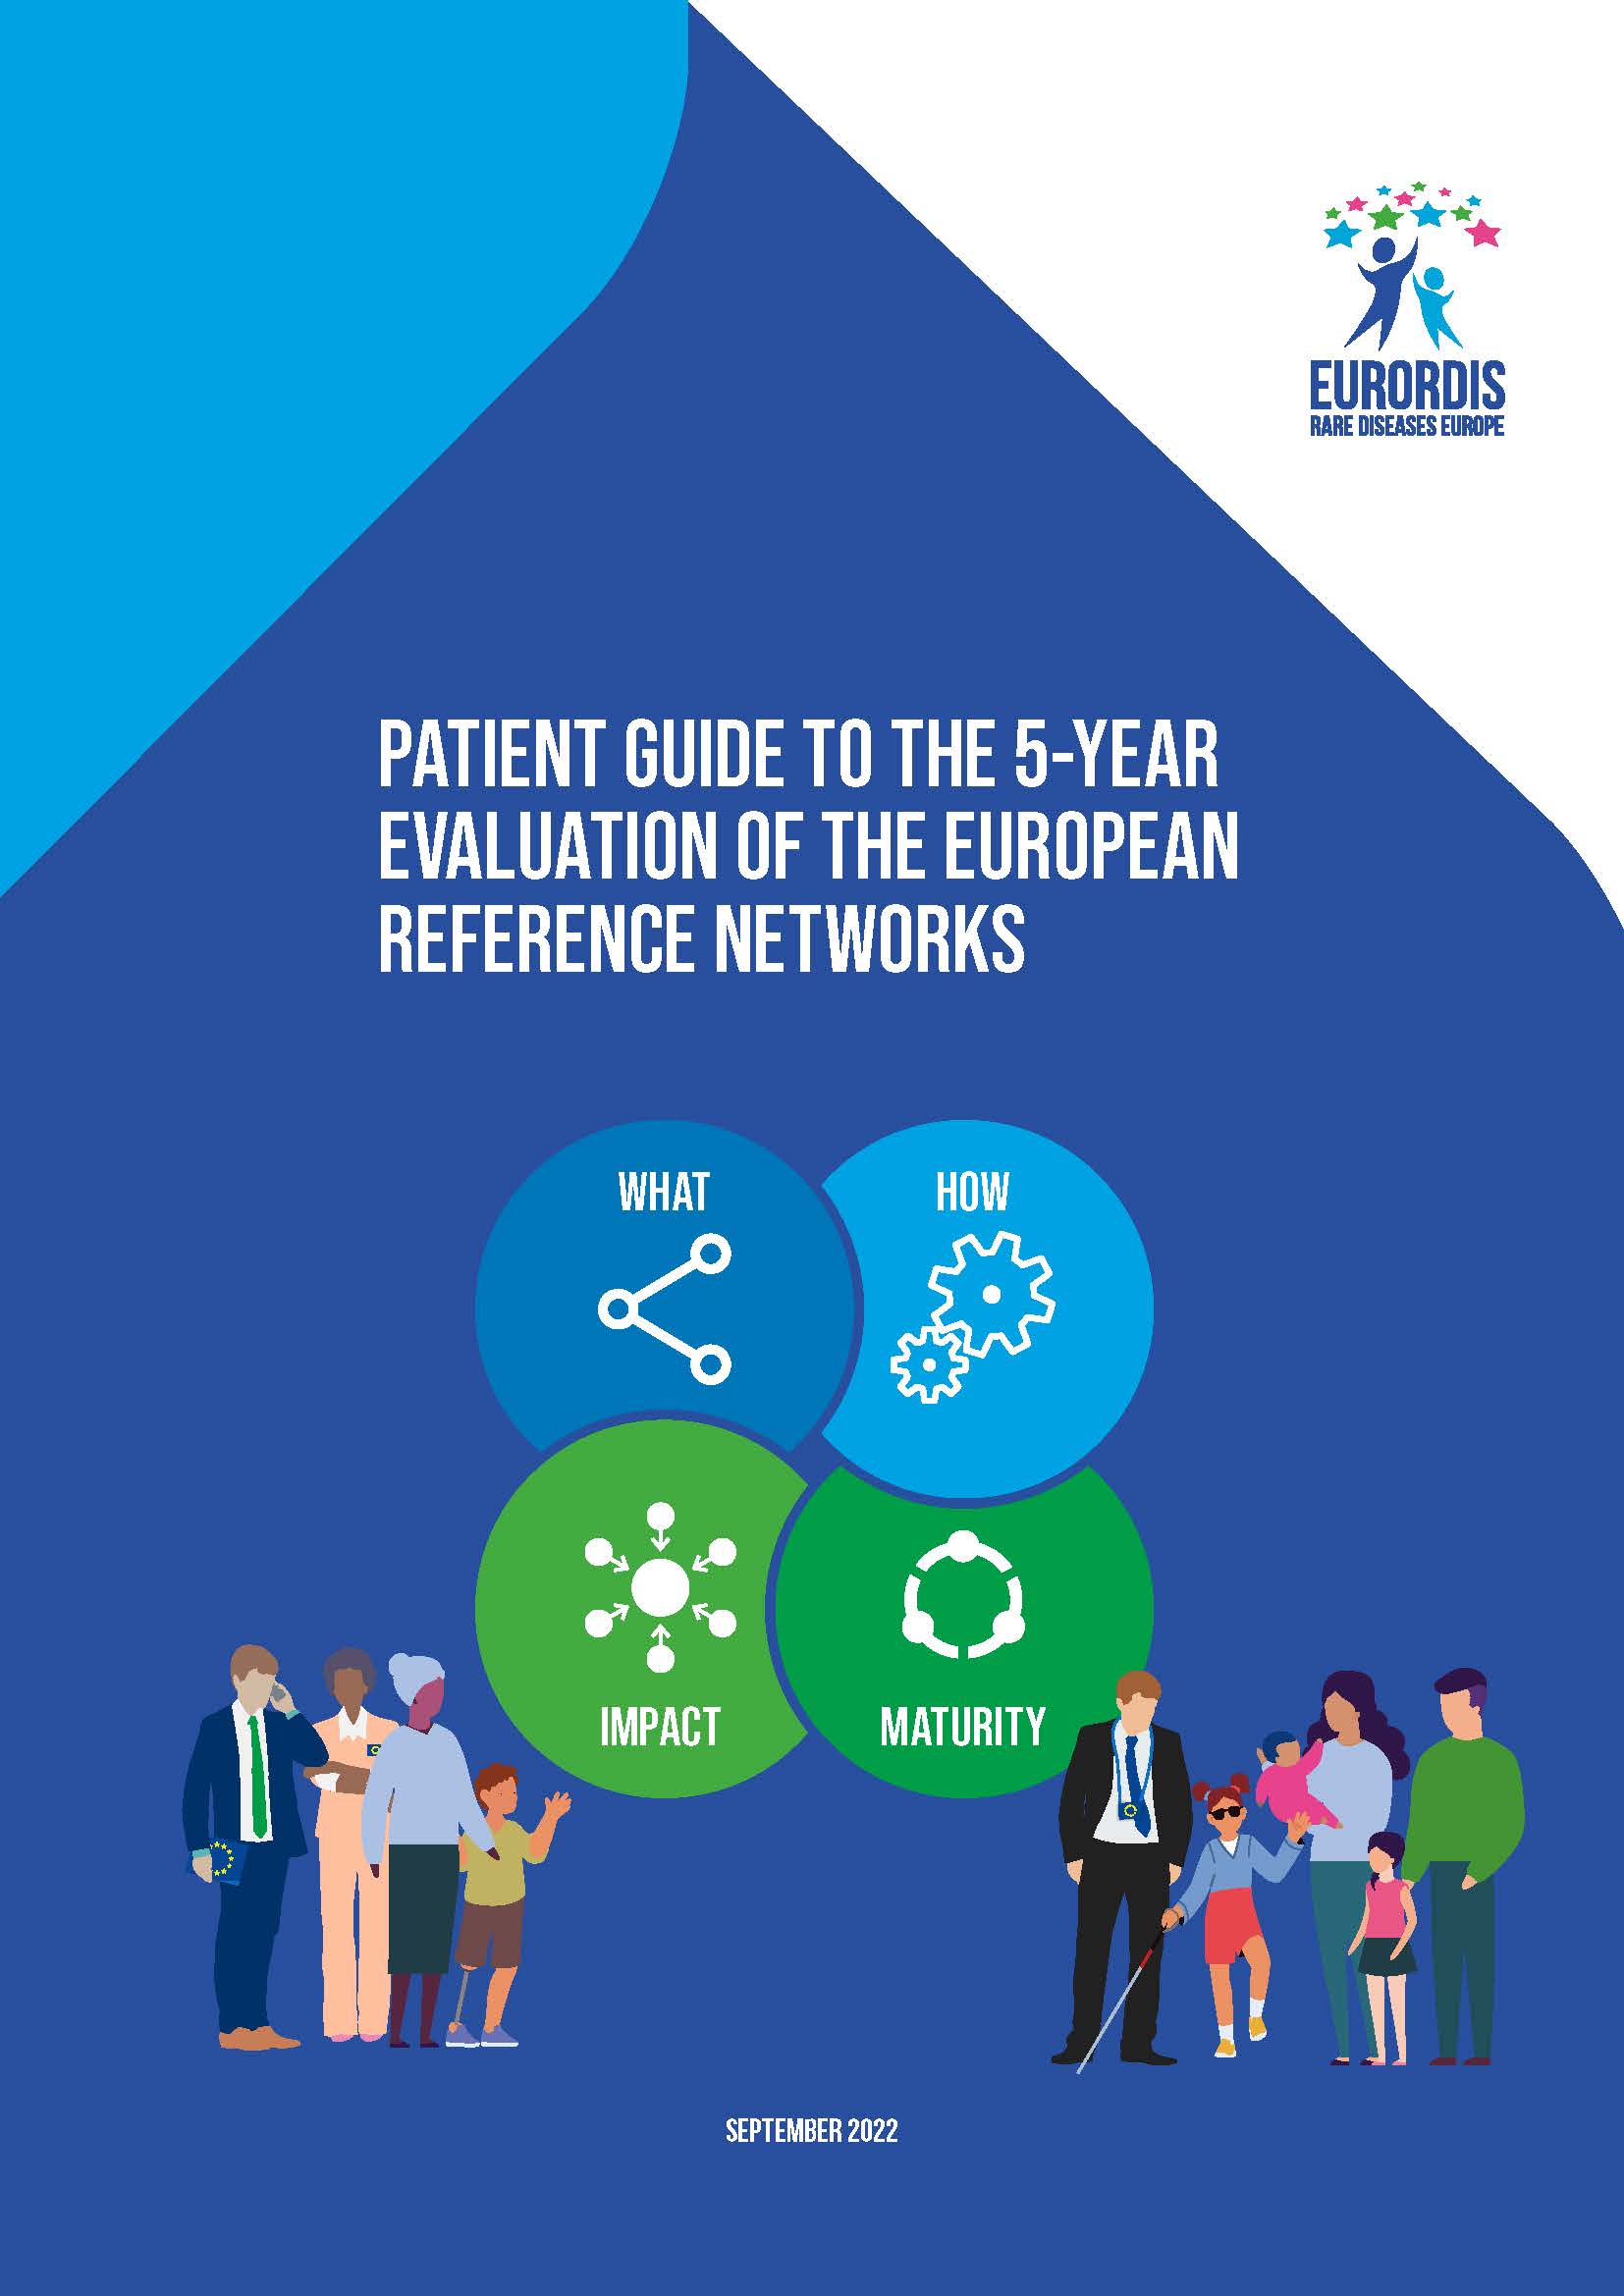 Patient Guide to the 5-Year Evaluation of the European Reference Networks